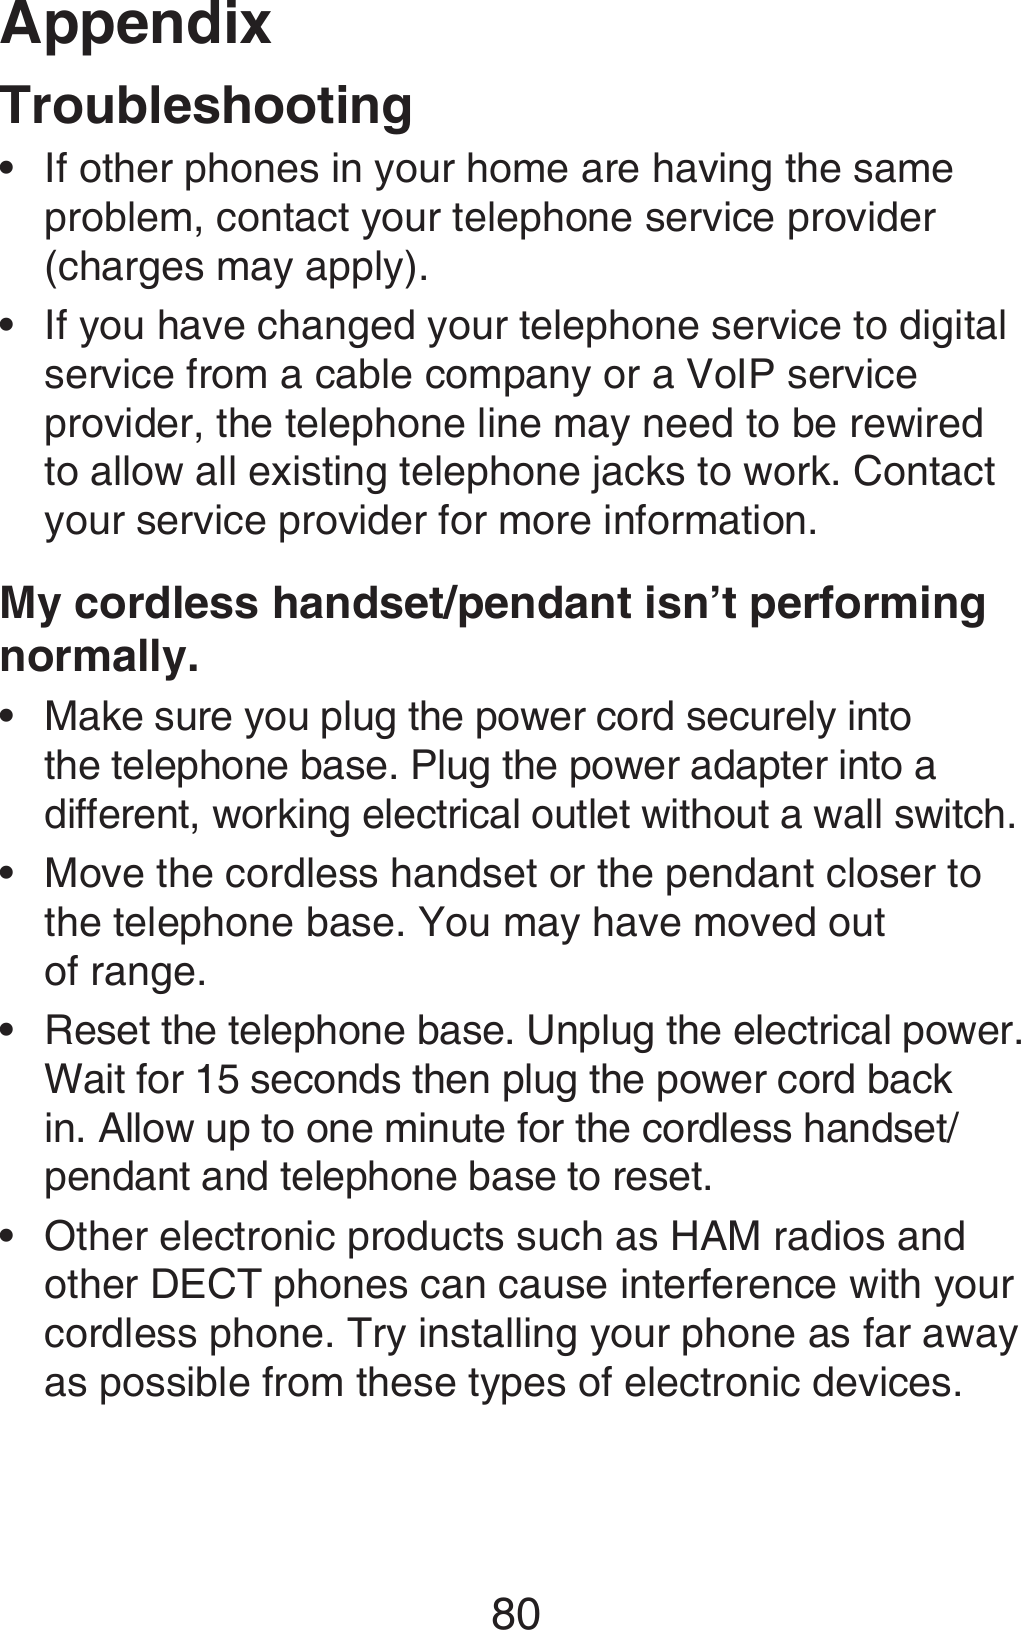 Appendix80TroubleshootingIf other phones in your home are having the same problem, contact your telephone service provider (charges may apply).If you have changed your telephone service to digital service from a cable company or a VoIP service provider, the telephone line may need to be rewired to allow all existing telephone jacks to work. Contact your service provider for more information.My cordless handset/pendant isn’t performing normally.Make sure you plug the power cord securely into the telephone base. Plug the power adapter into a different, working electrical outlet without a wall switch.Move the cordless handset or the pendant closer to the telephone base. You may have moved out  of range.Reset the telephone base. Unplug the electrical power. Wait for 15 seconds then plug the power cord back in. Allow up to one minute for the cordless handset/pendant and telephone base to reset.Other electronic products such as HAM radios and other DECT phones can cause interference with your cordless phone. Try installing your phone as far away as possible from these types of electronic devices. ••••••